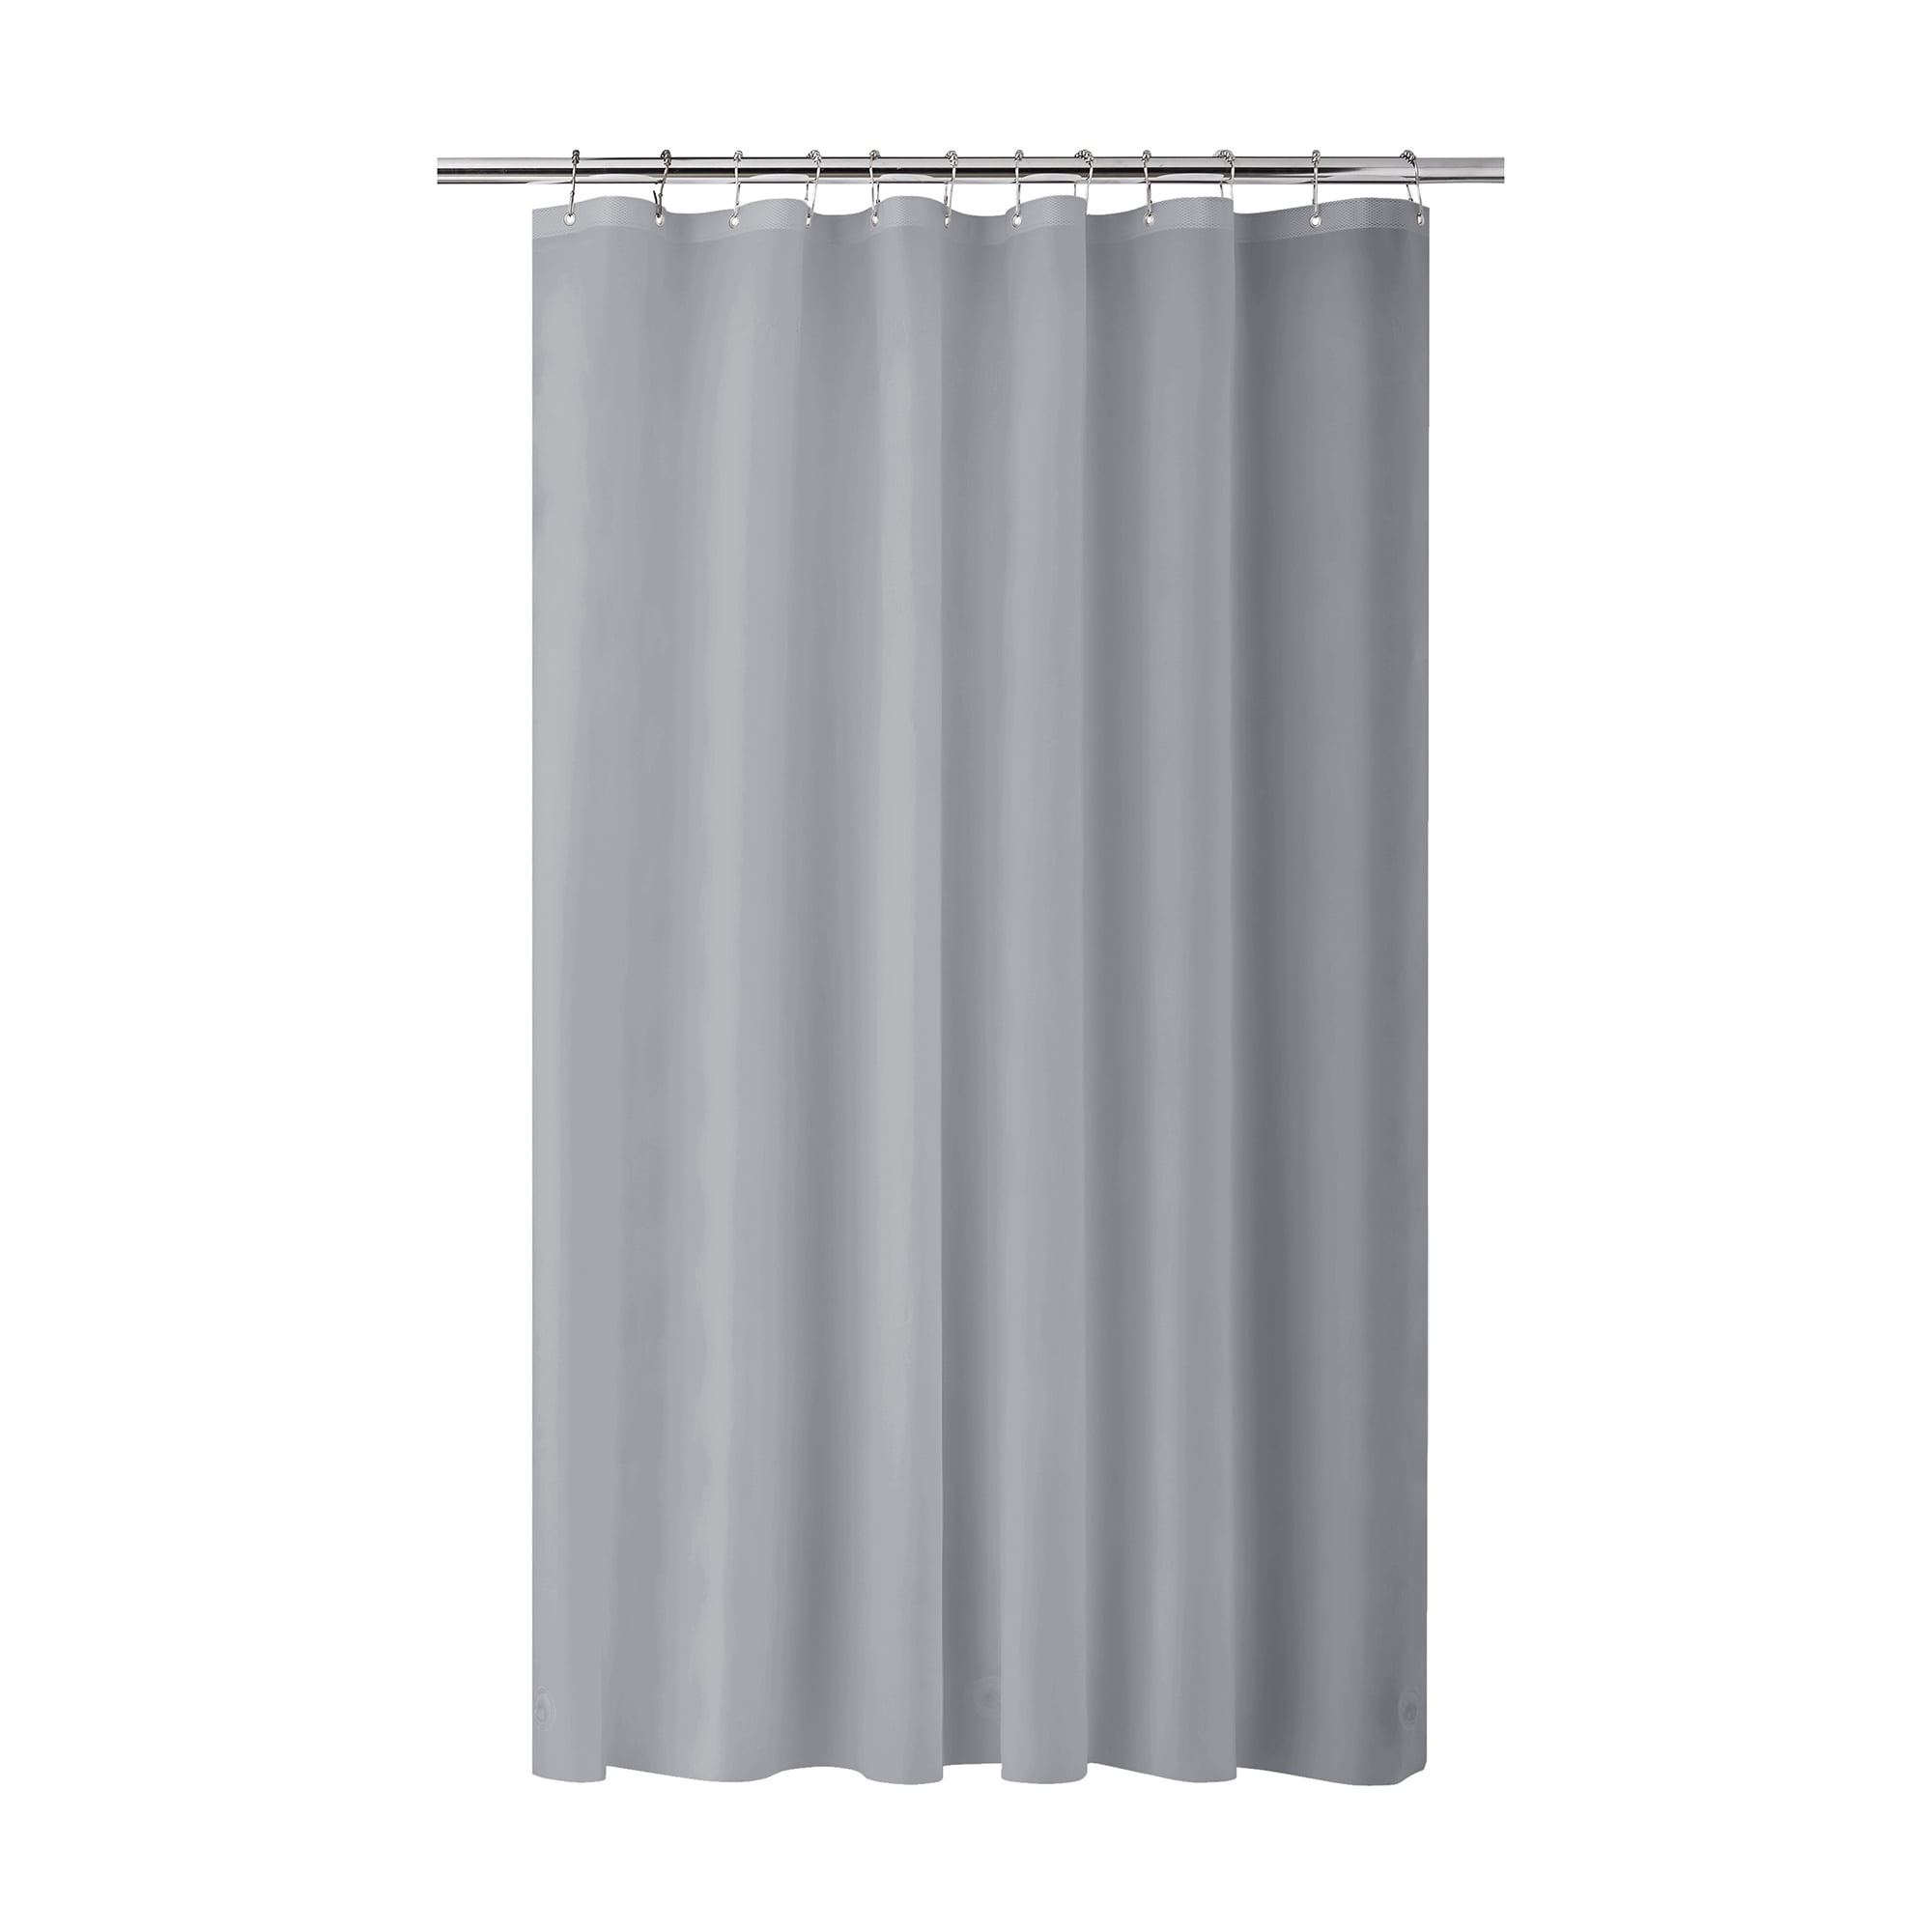 100% Polyester 70 x 72 EXCELL Chevron Fabric Shower Curtain Liner Water-Repellent Bath Liner with Suction cups for Master Bathroom Guest Bathroom Kids Bathroom Vanilla 